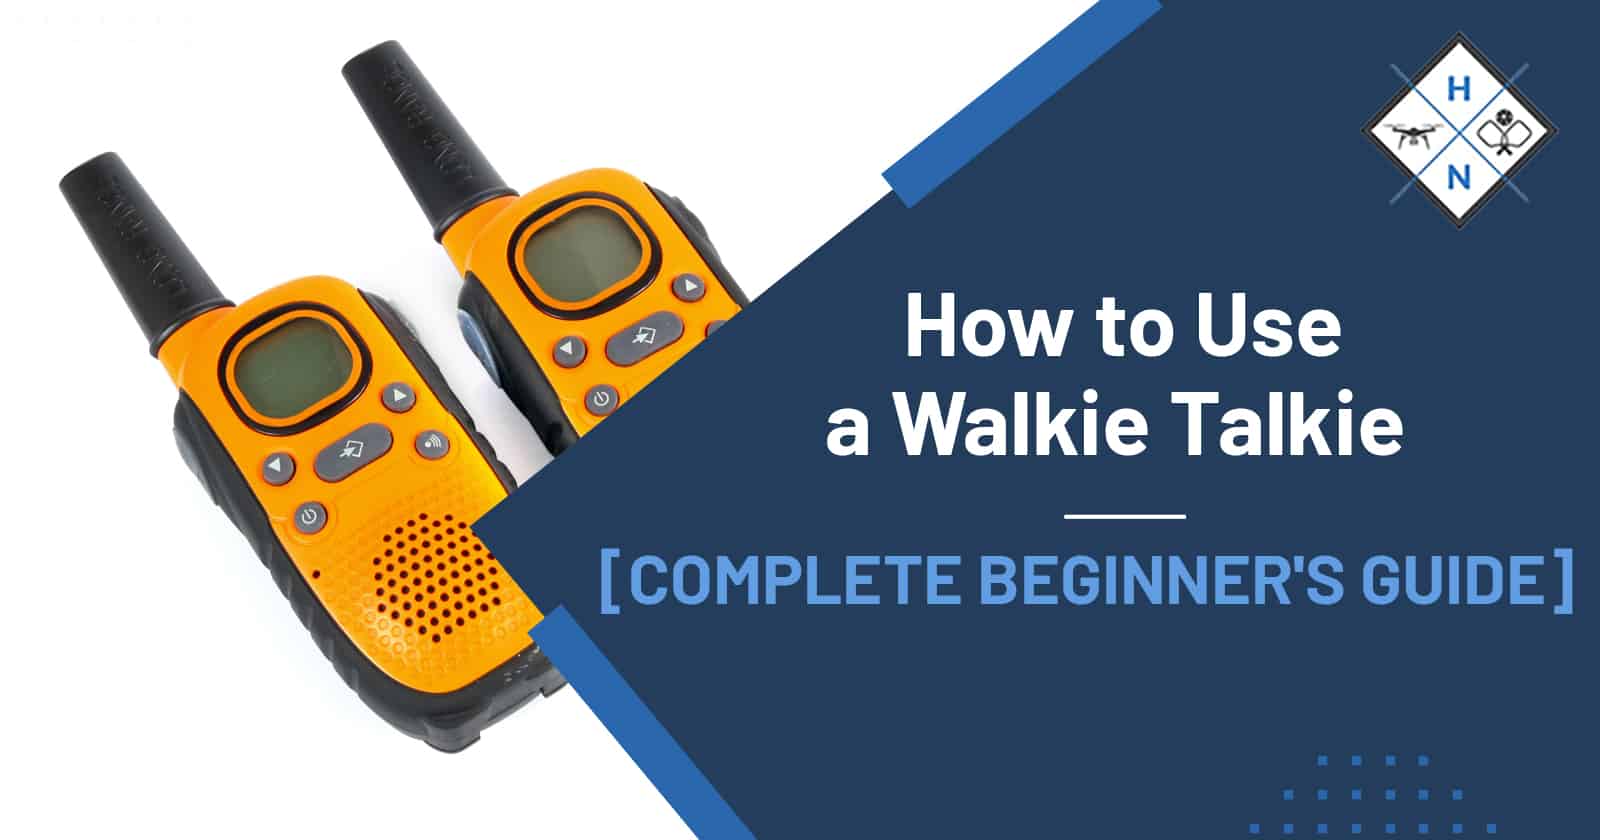 How to Use a Walkie Talkies [COMPLETE BEGINNER’S GUIDE]